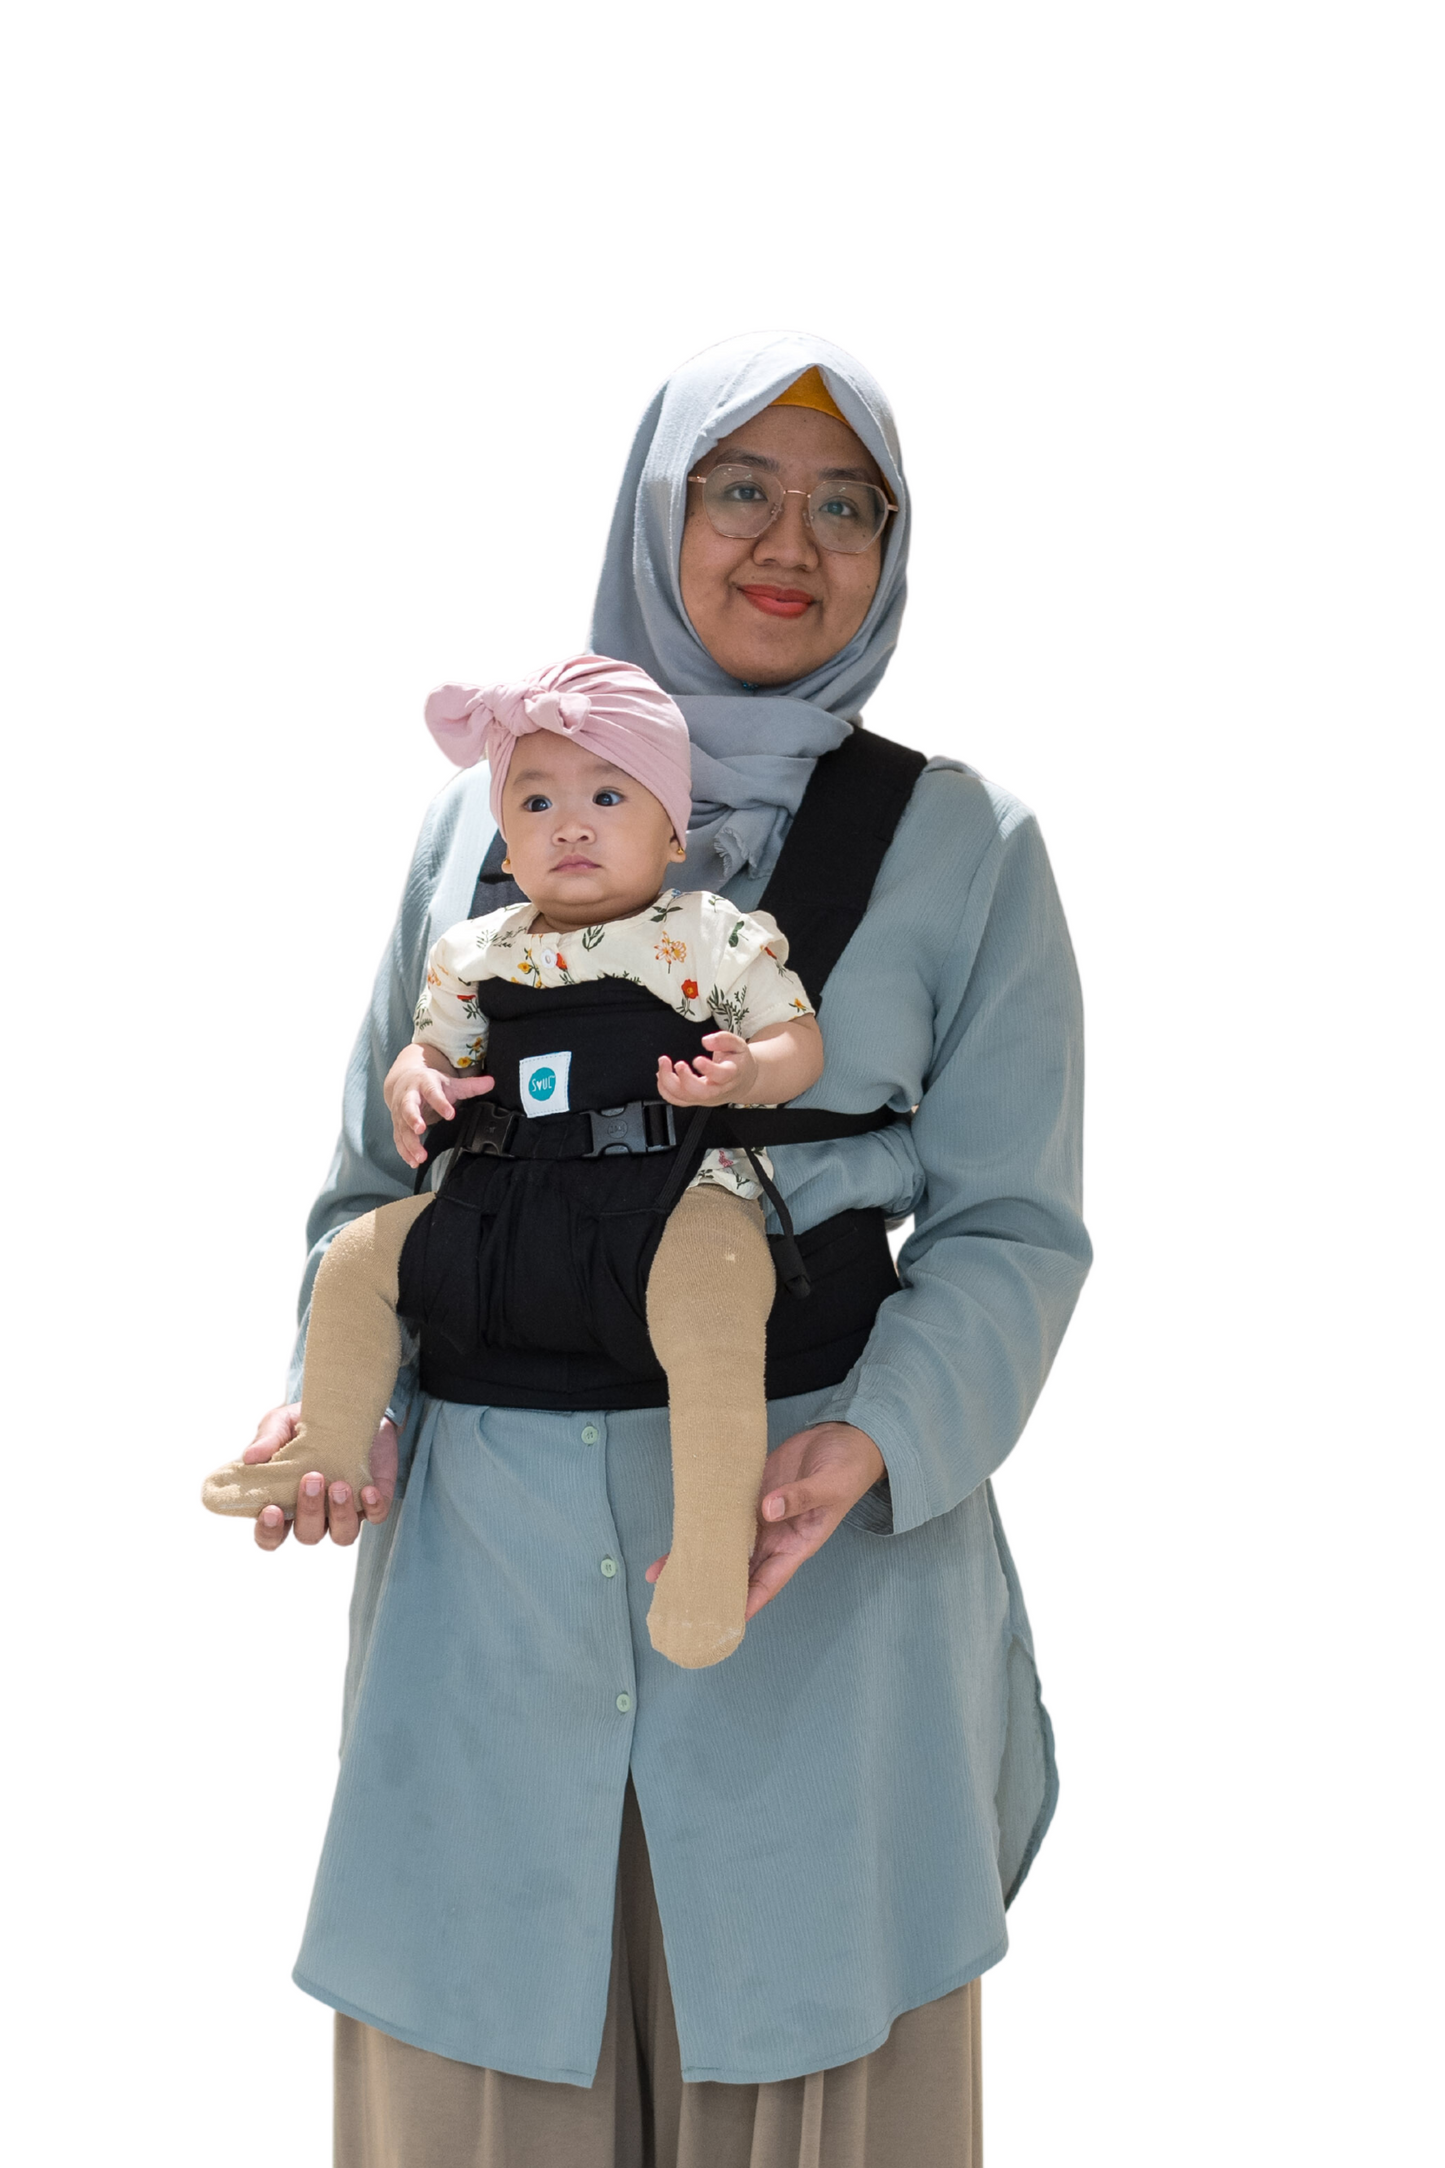 Lali: Cotton Black baby Carrier